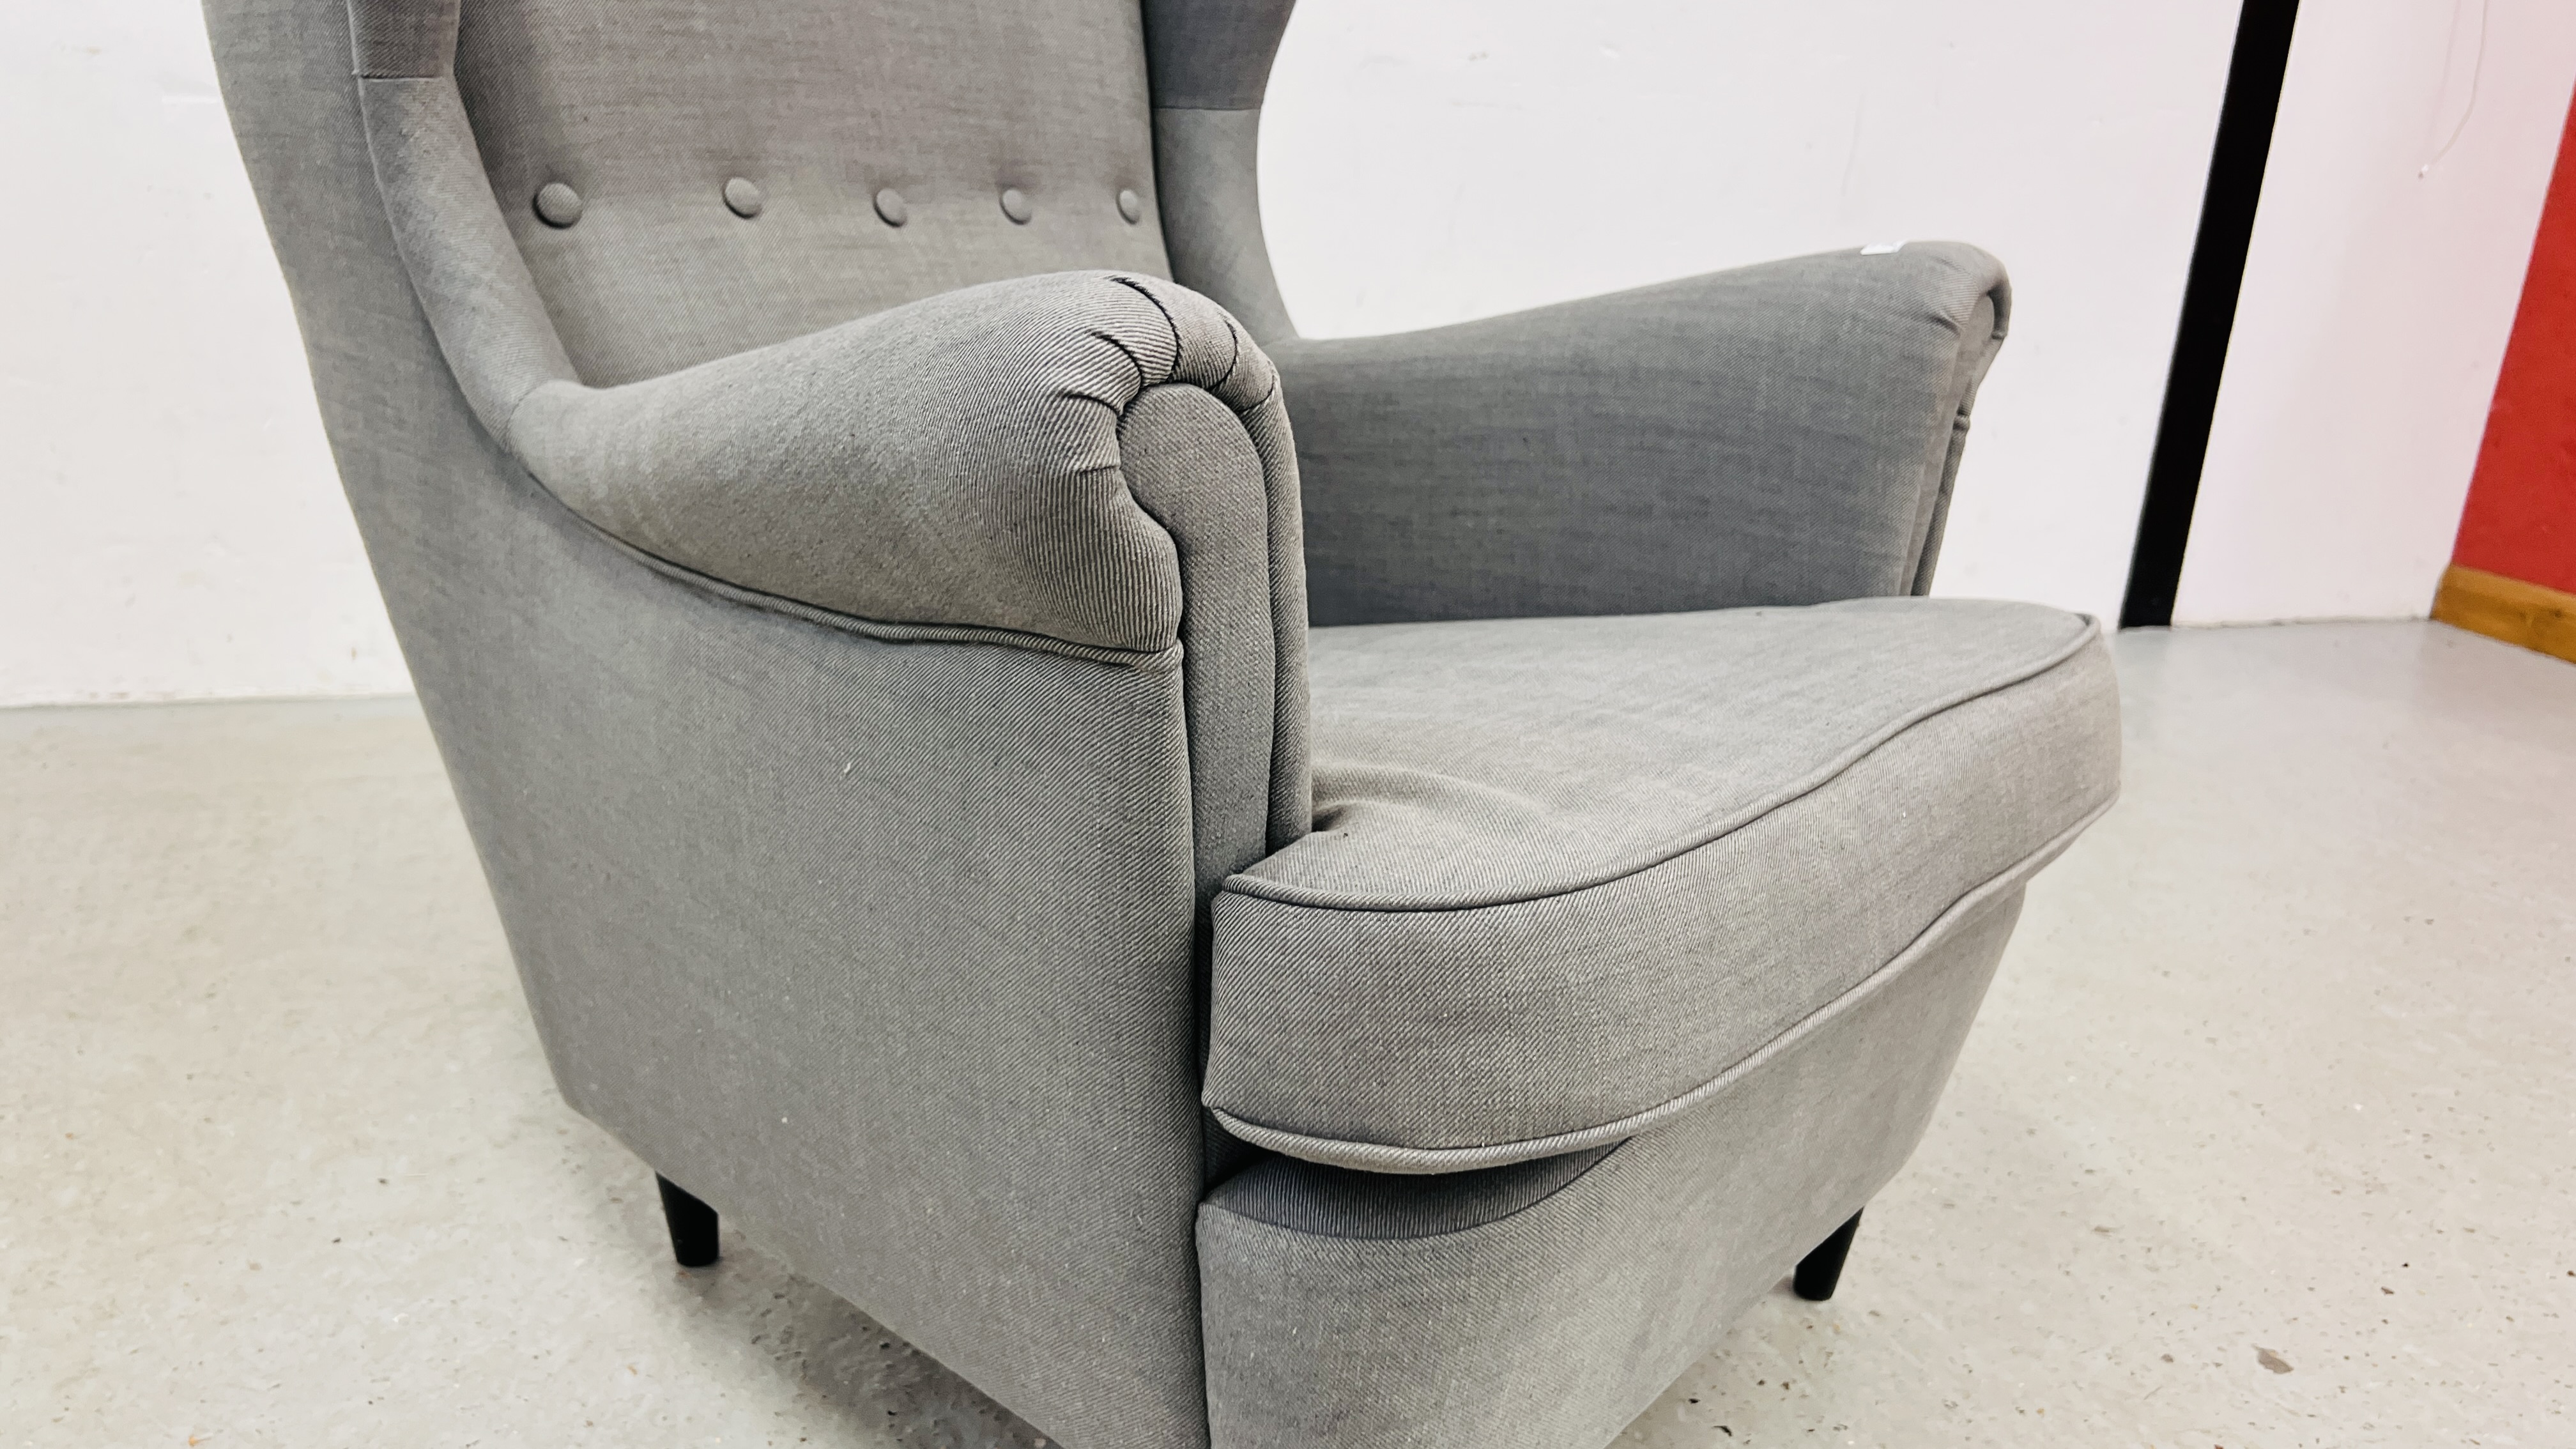 A MODERN IKEA DESIGNER WINGED ARM CHAIR GREY UPHOLSTERED. - Image 3 of 5